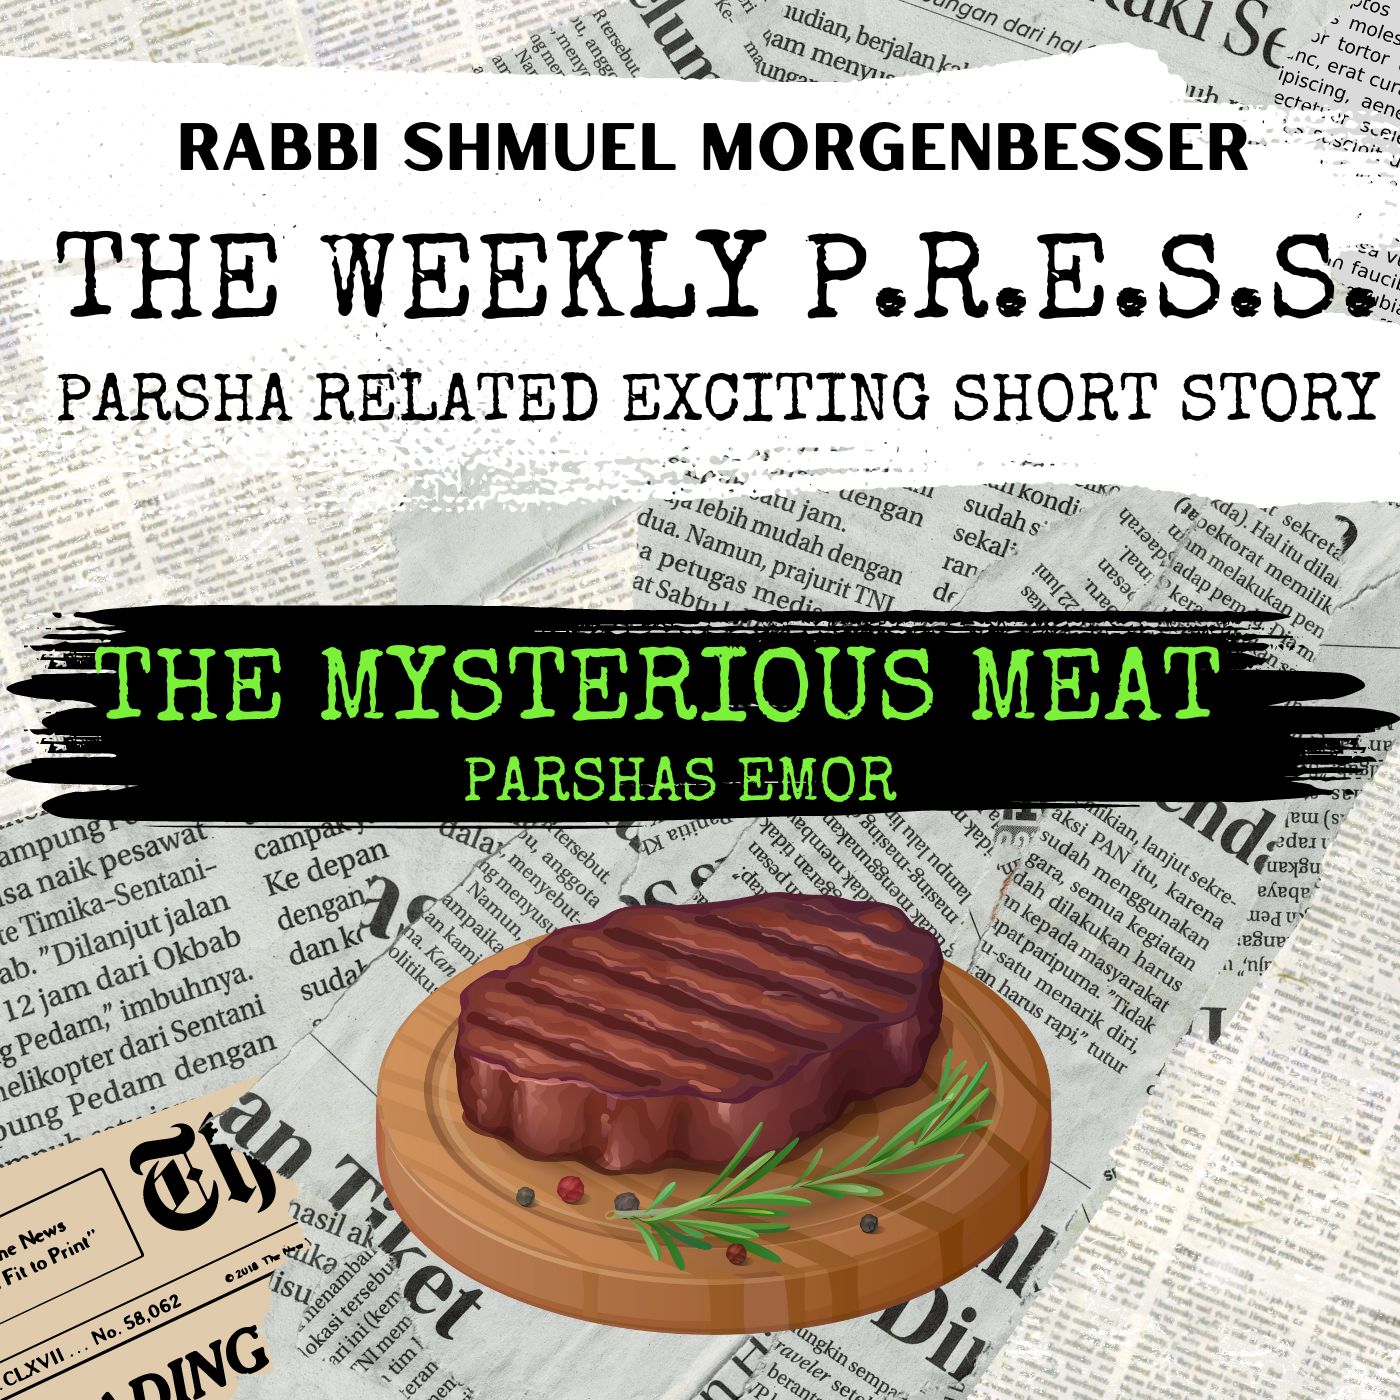 Rabbi Shmuel Morgenbesser - The Mysterious Meat [Short Story] (Single)